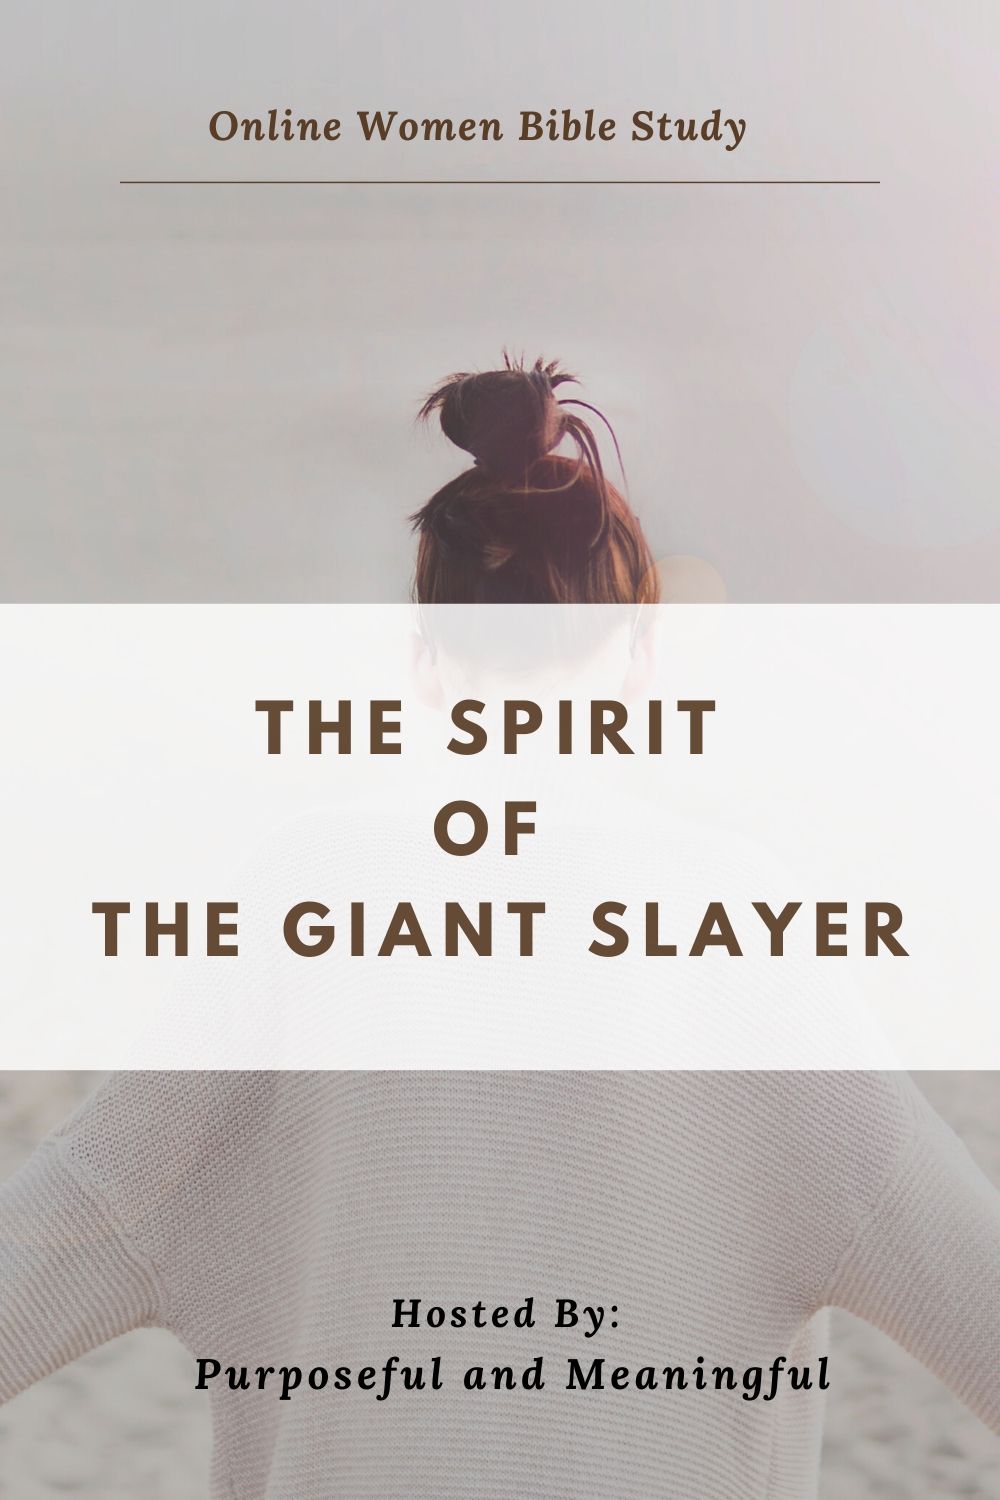 New Women Online Bible Study: The Spirit of the Giant Slayer